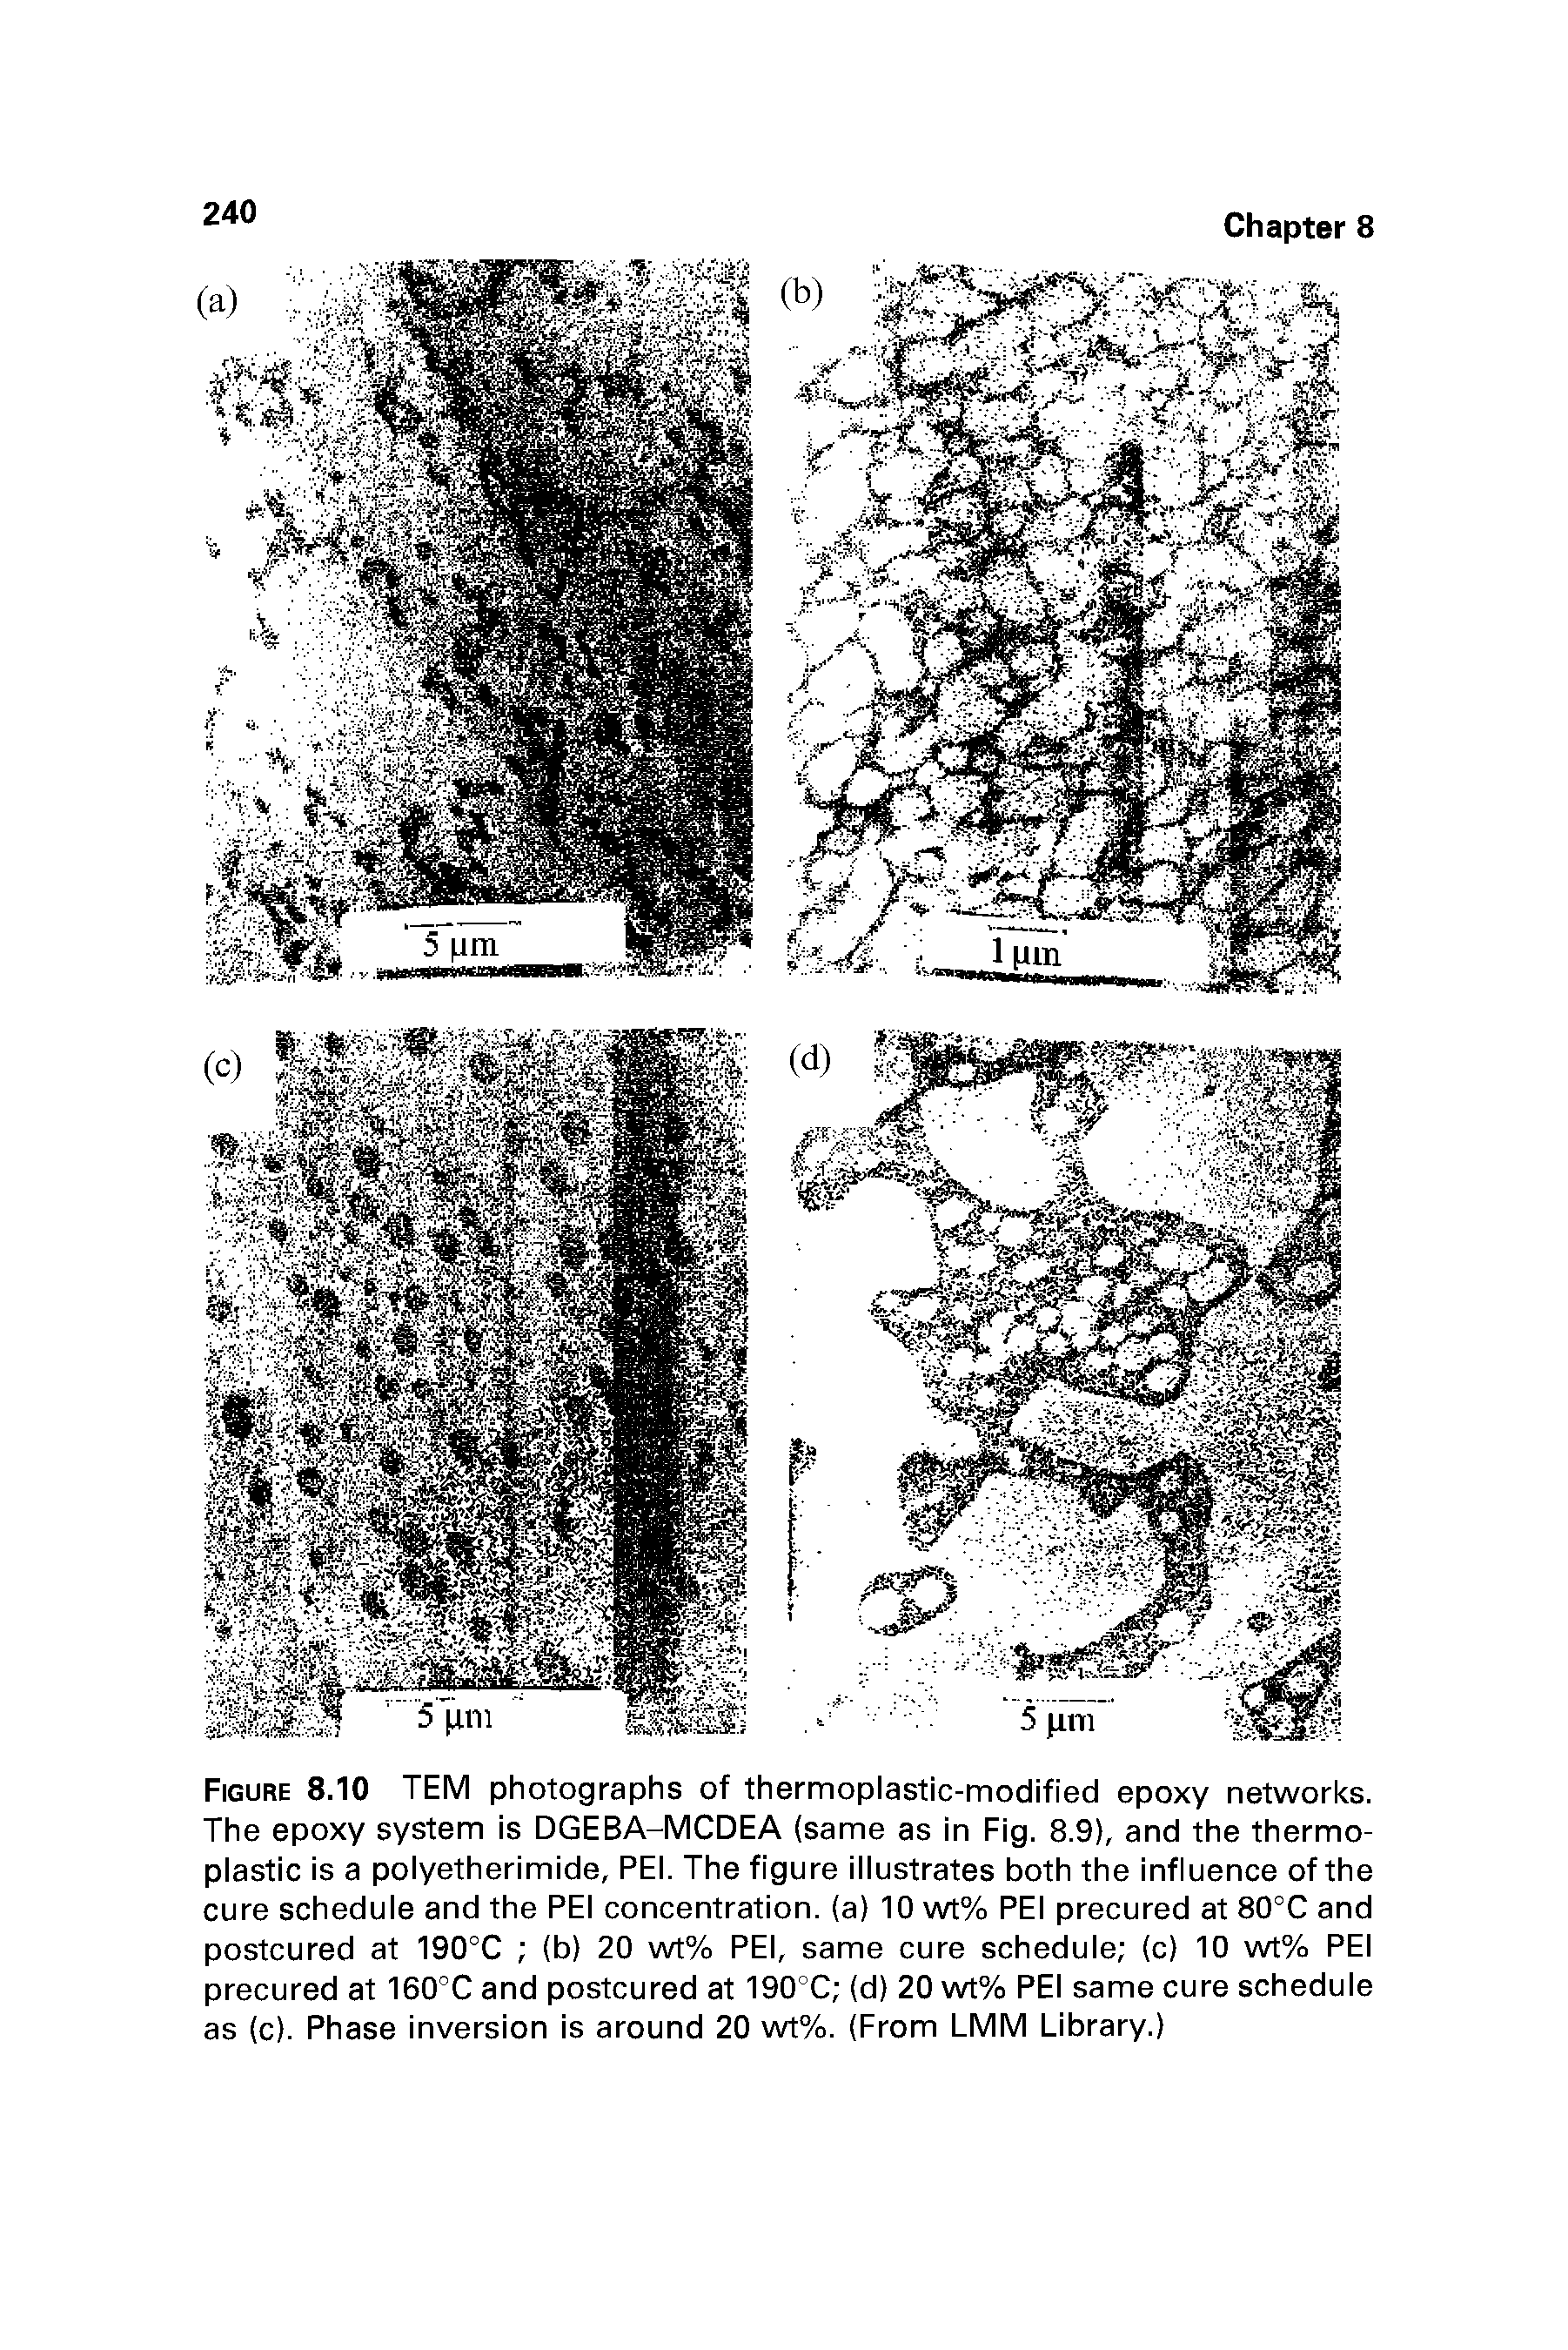 Figure 8.10 TEM photographs of thermoplastic-modified epoxy networks. The epoxy system is DGEBA-MCDEA (same as in Fig. 8.9), and the thermoplastic is a polyetherimide, PEI. The figure illustrates both the influence of the cure schedule and the PEI concentration, (a) 10 wt% PEI precured at 80°C and postcured at 190°C (b) 20 wt% PEI, same cure schedule (c) 10 wt% PEI precured at 160°C and postcured at 190°C (d) 20 wt% PEI same cure schedule as (c). Phase inversion is around 20 wt%. (From LMM Library.)...